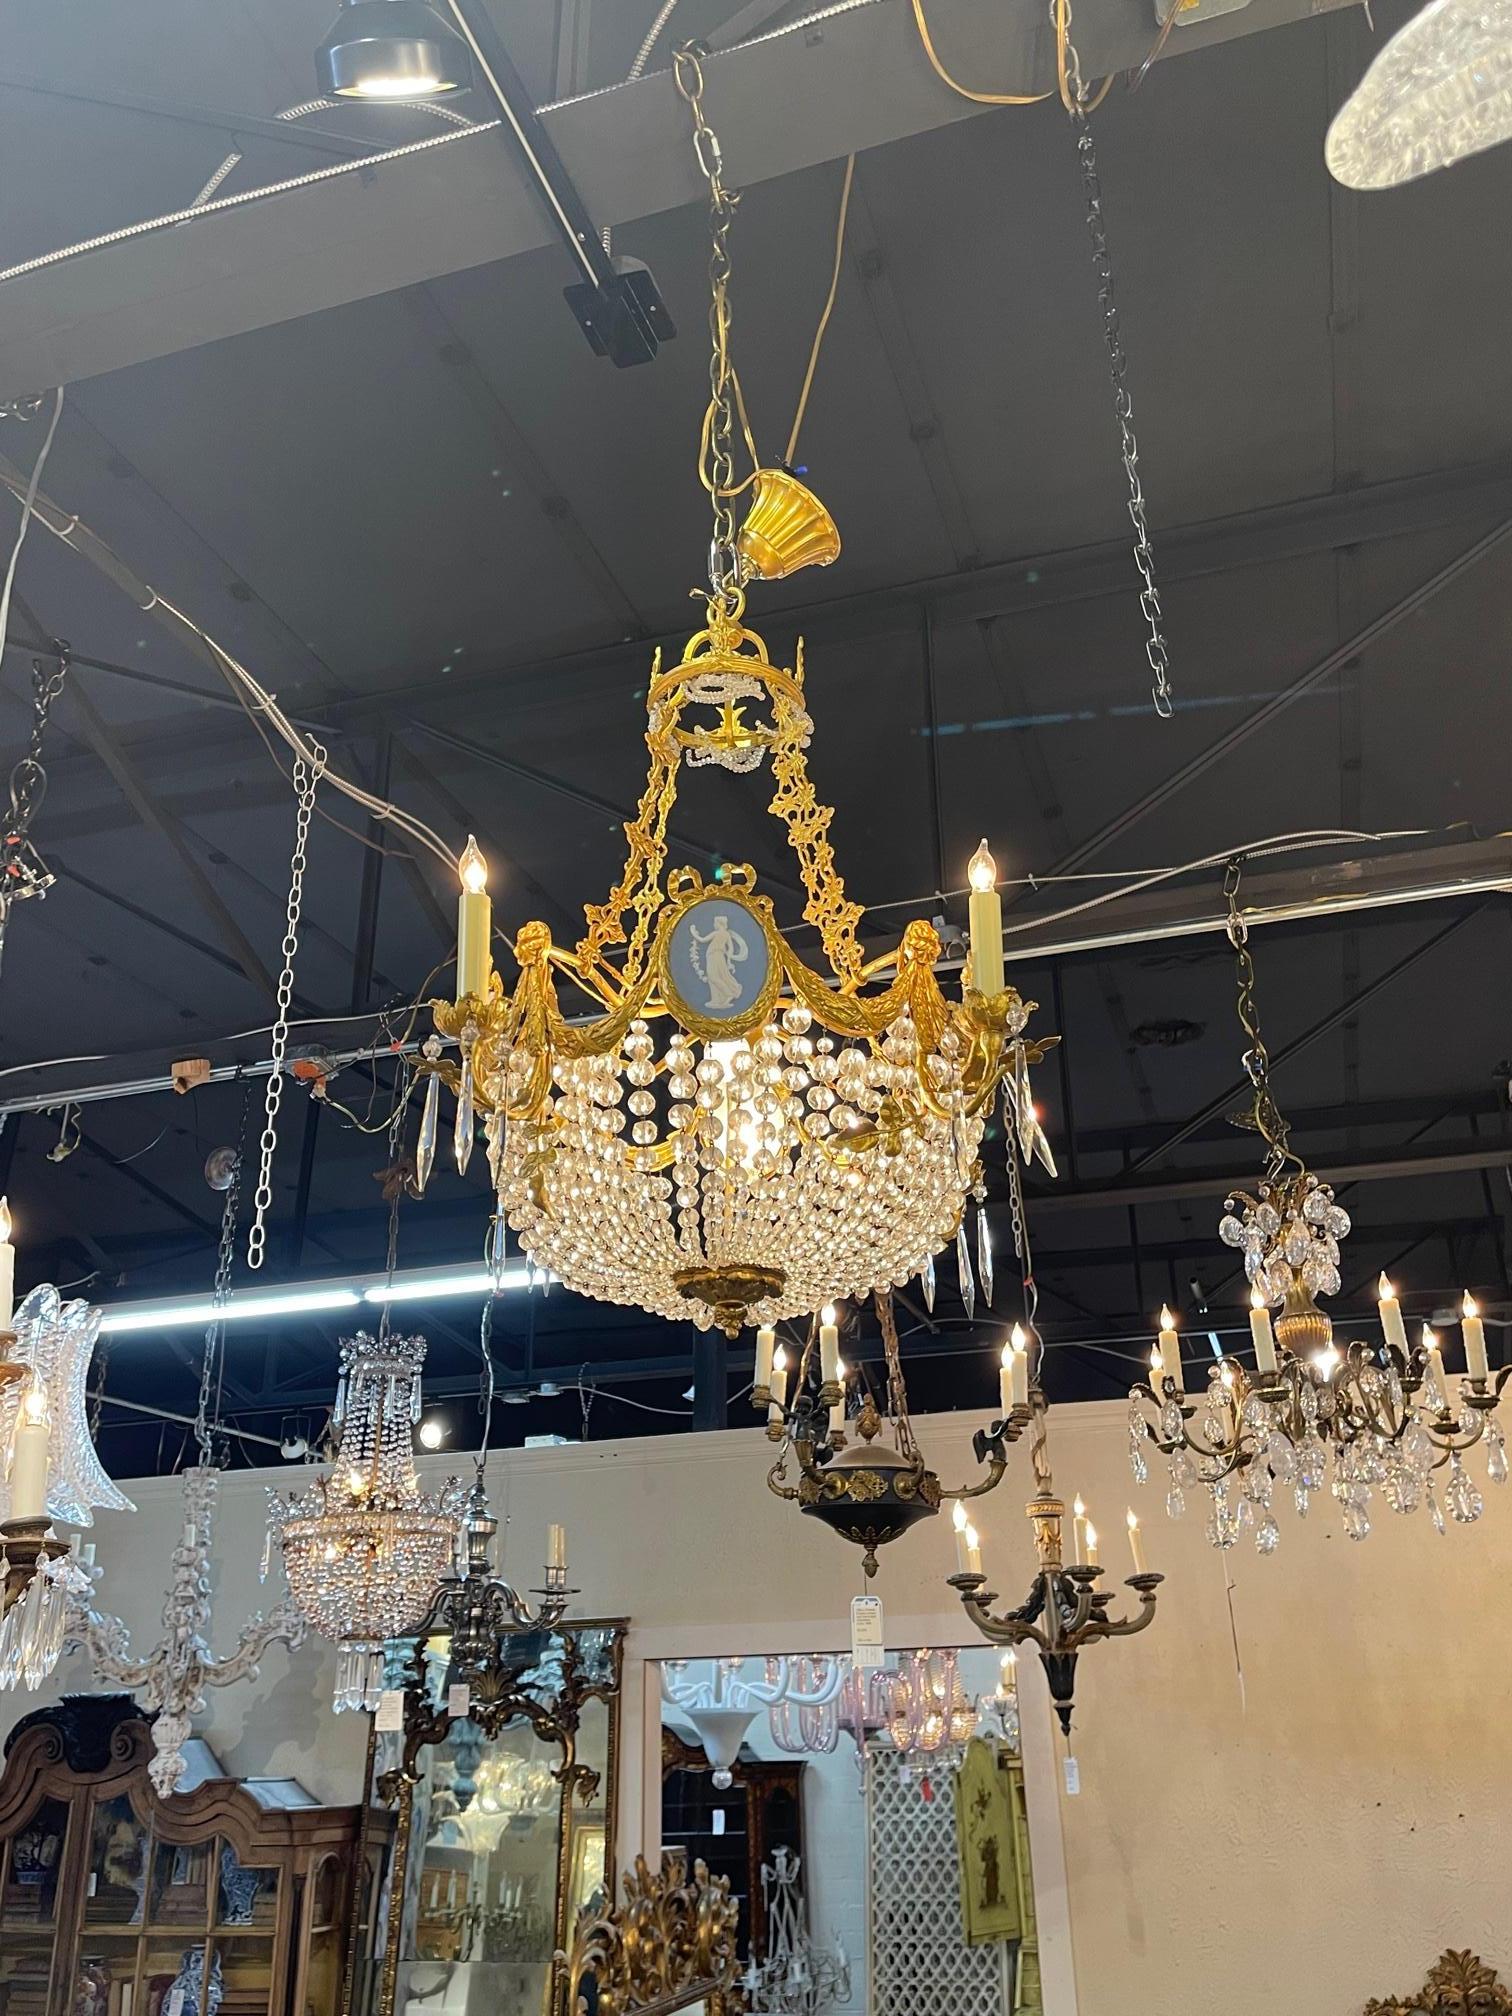 Fine quality 19th century French bronze and wedgwood plaque basket chandelier, Circa 1870. The chandelier has been professionally re-wired, cleaned and is ready to hang. Includes matching chain and canopy. Sure to make a statement.